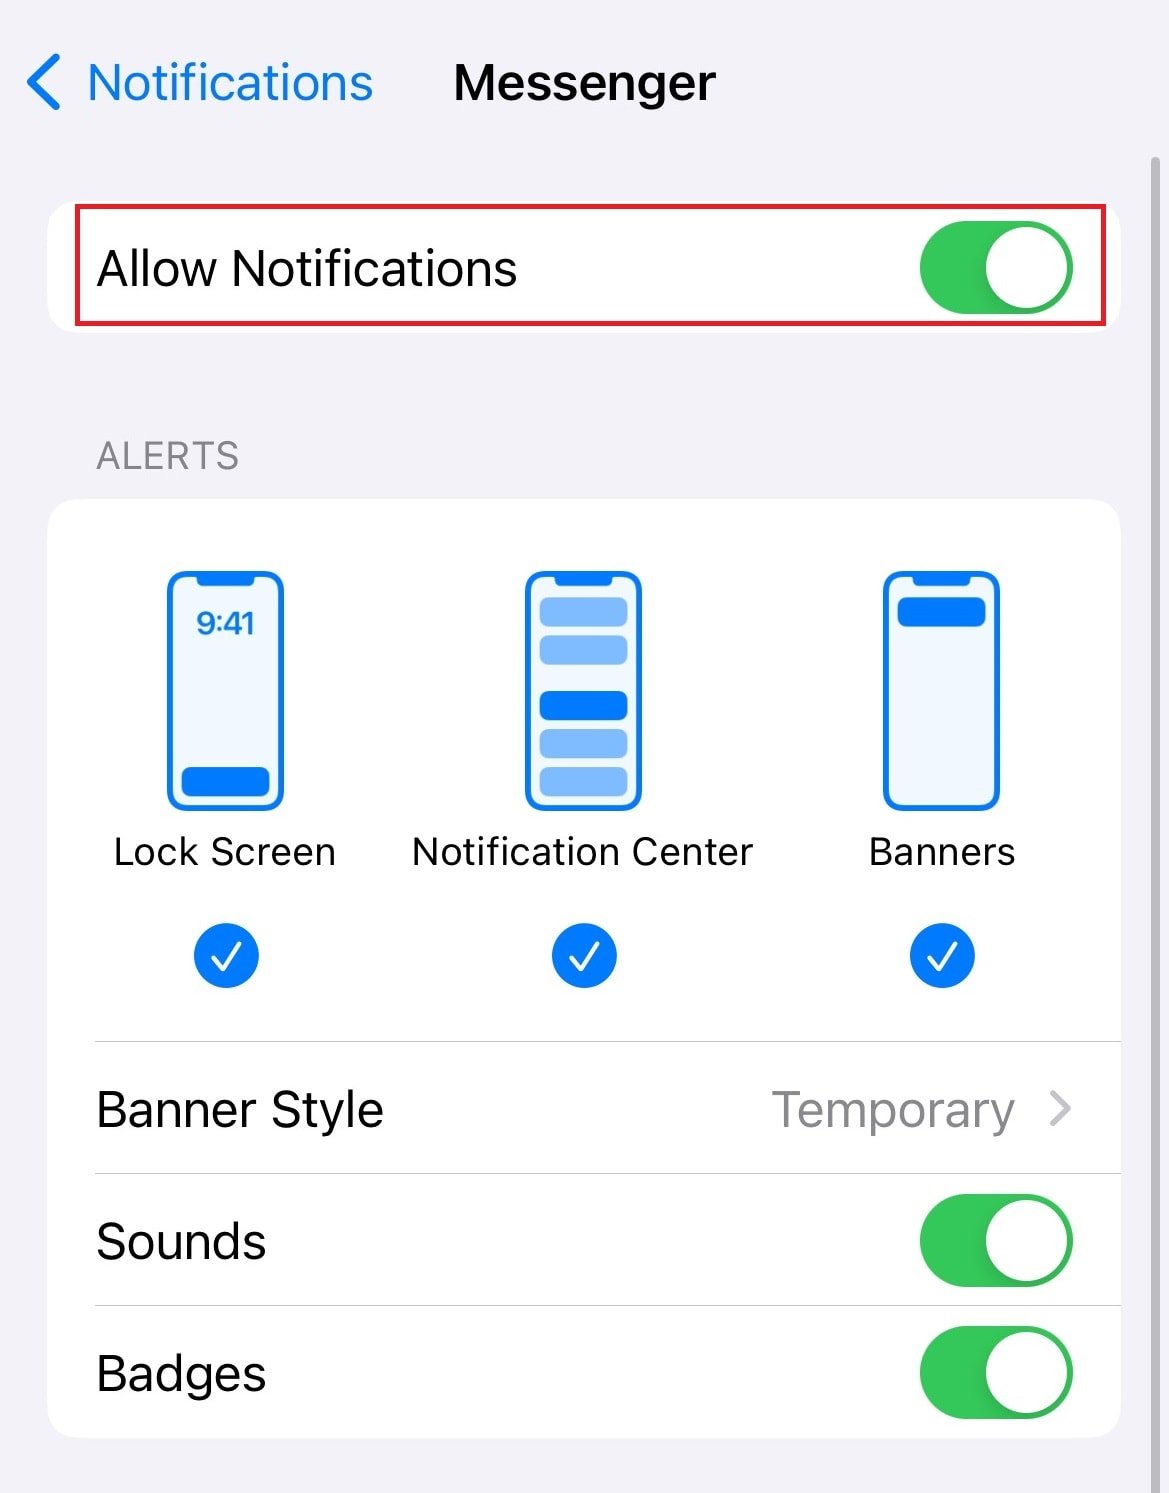 Turn on the toggle for Allow Notifications